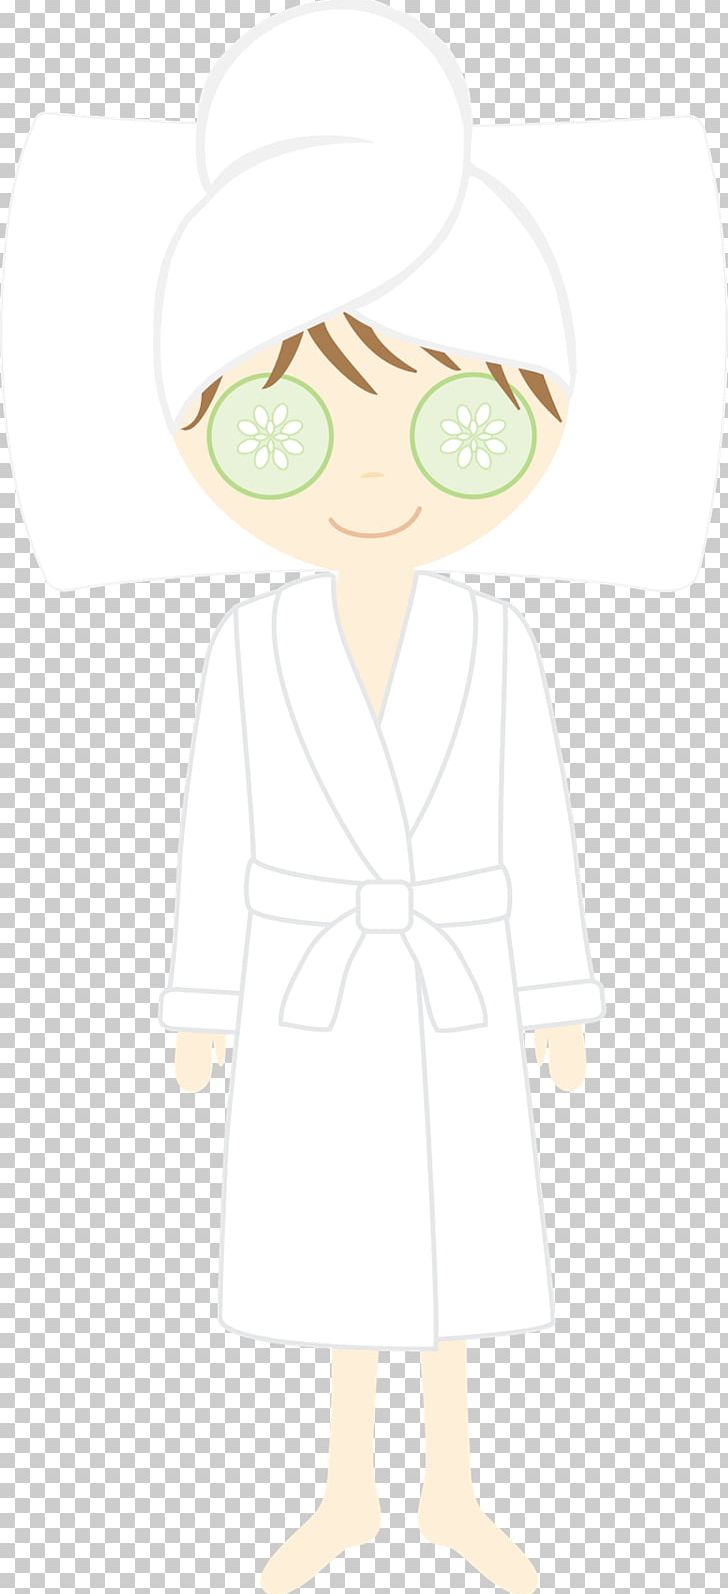 Robe Dress Sleeve Finger PNG, Clipart, Cartoon, Character, Child, Costume Design, Dress Free PNG Download